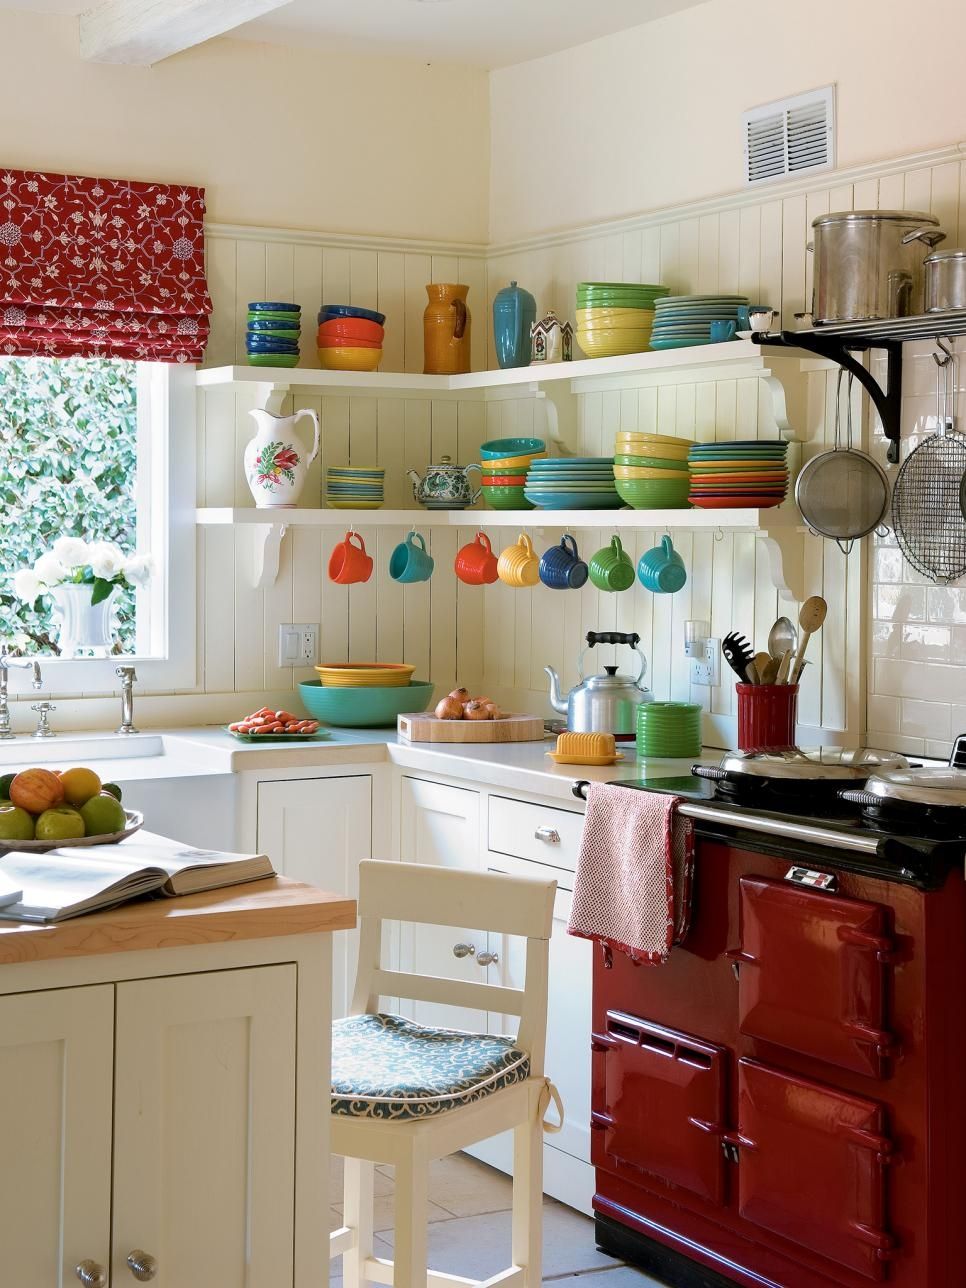 White kitchen interior with a harmonious combination of colors